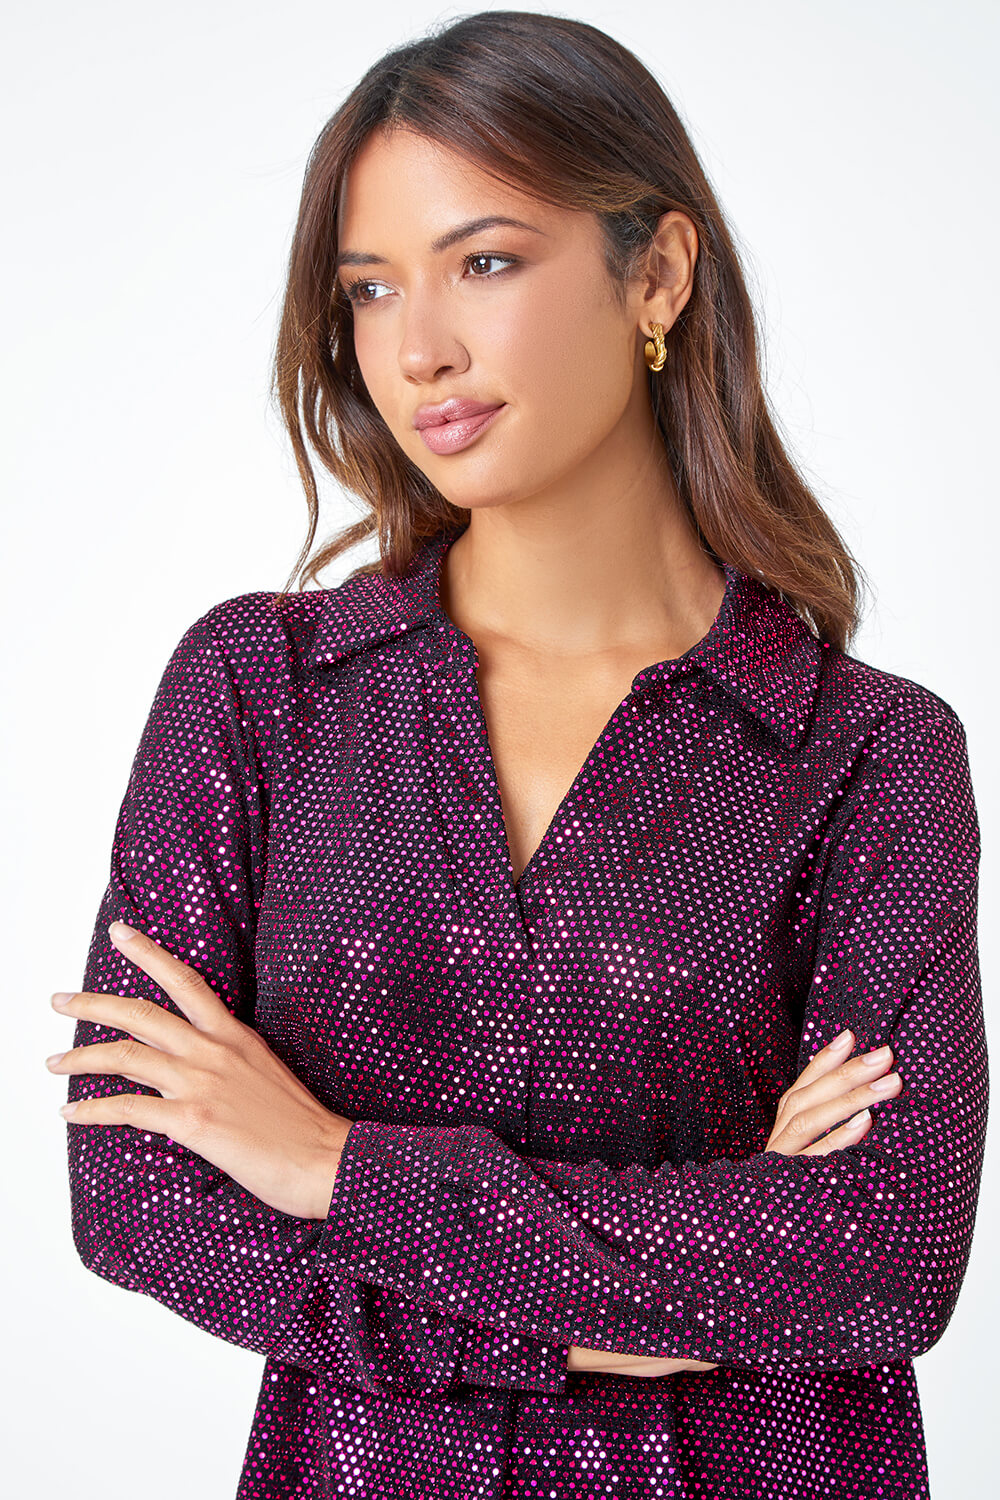 CERISE Sequin Stretch Shirt Top, Image 4 of 5